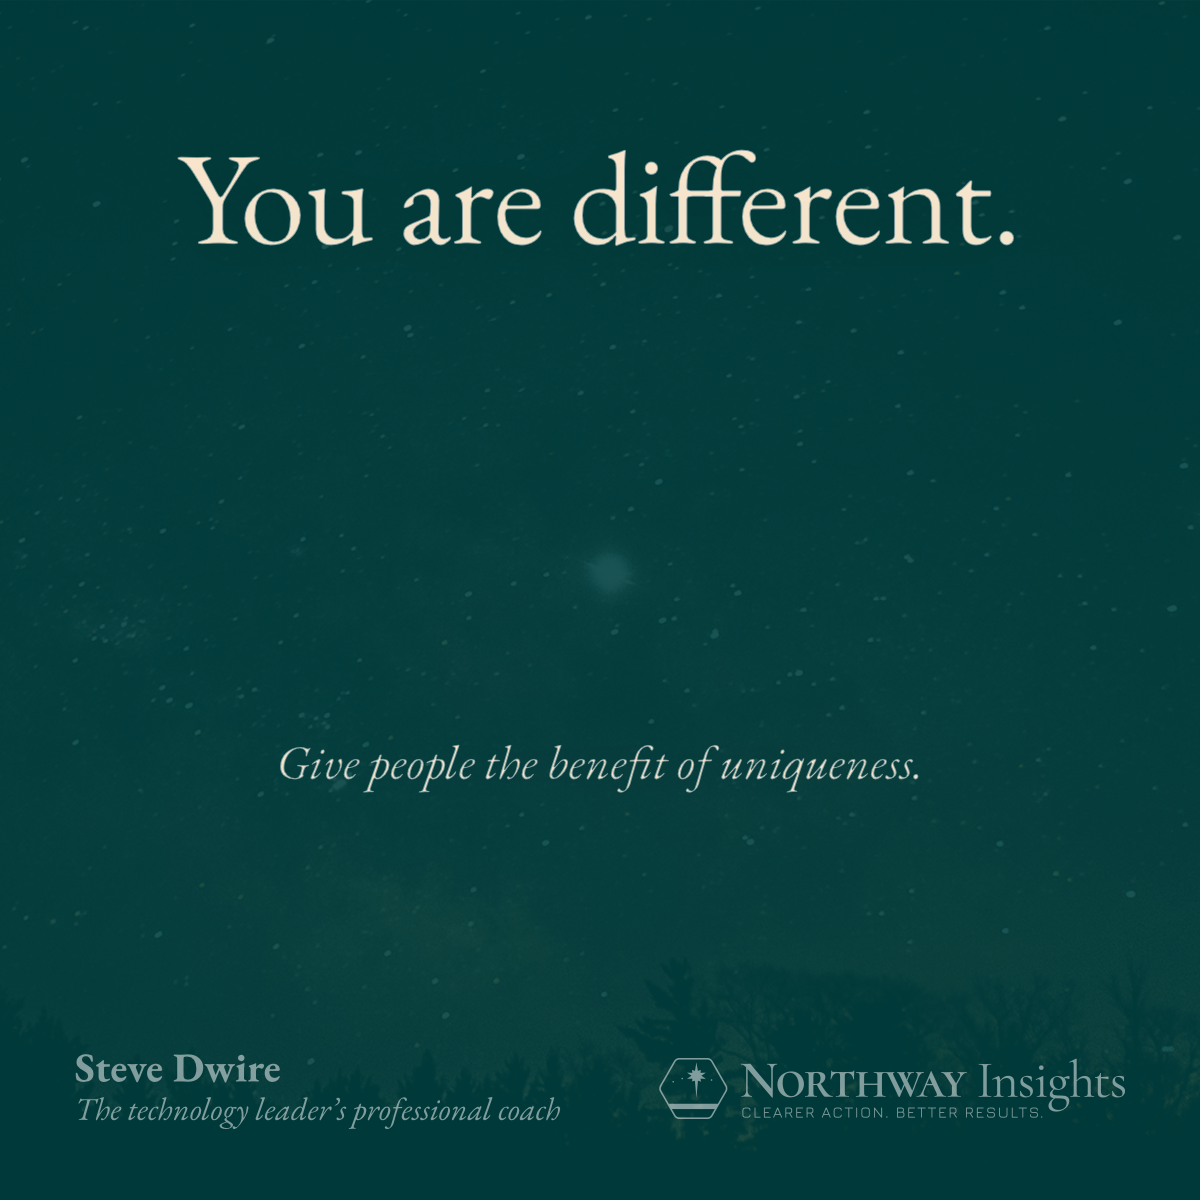 You are different. (Give people the benefit of uniqueness.)